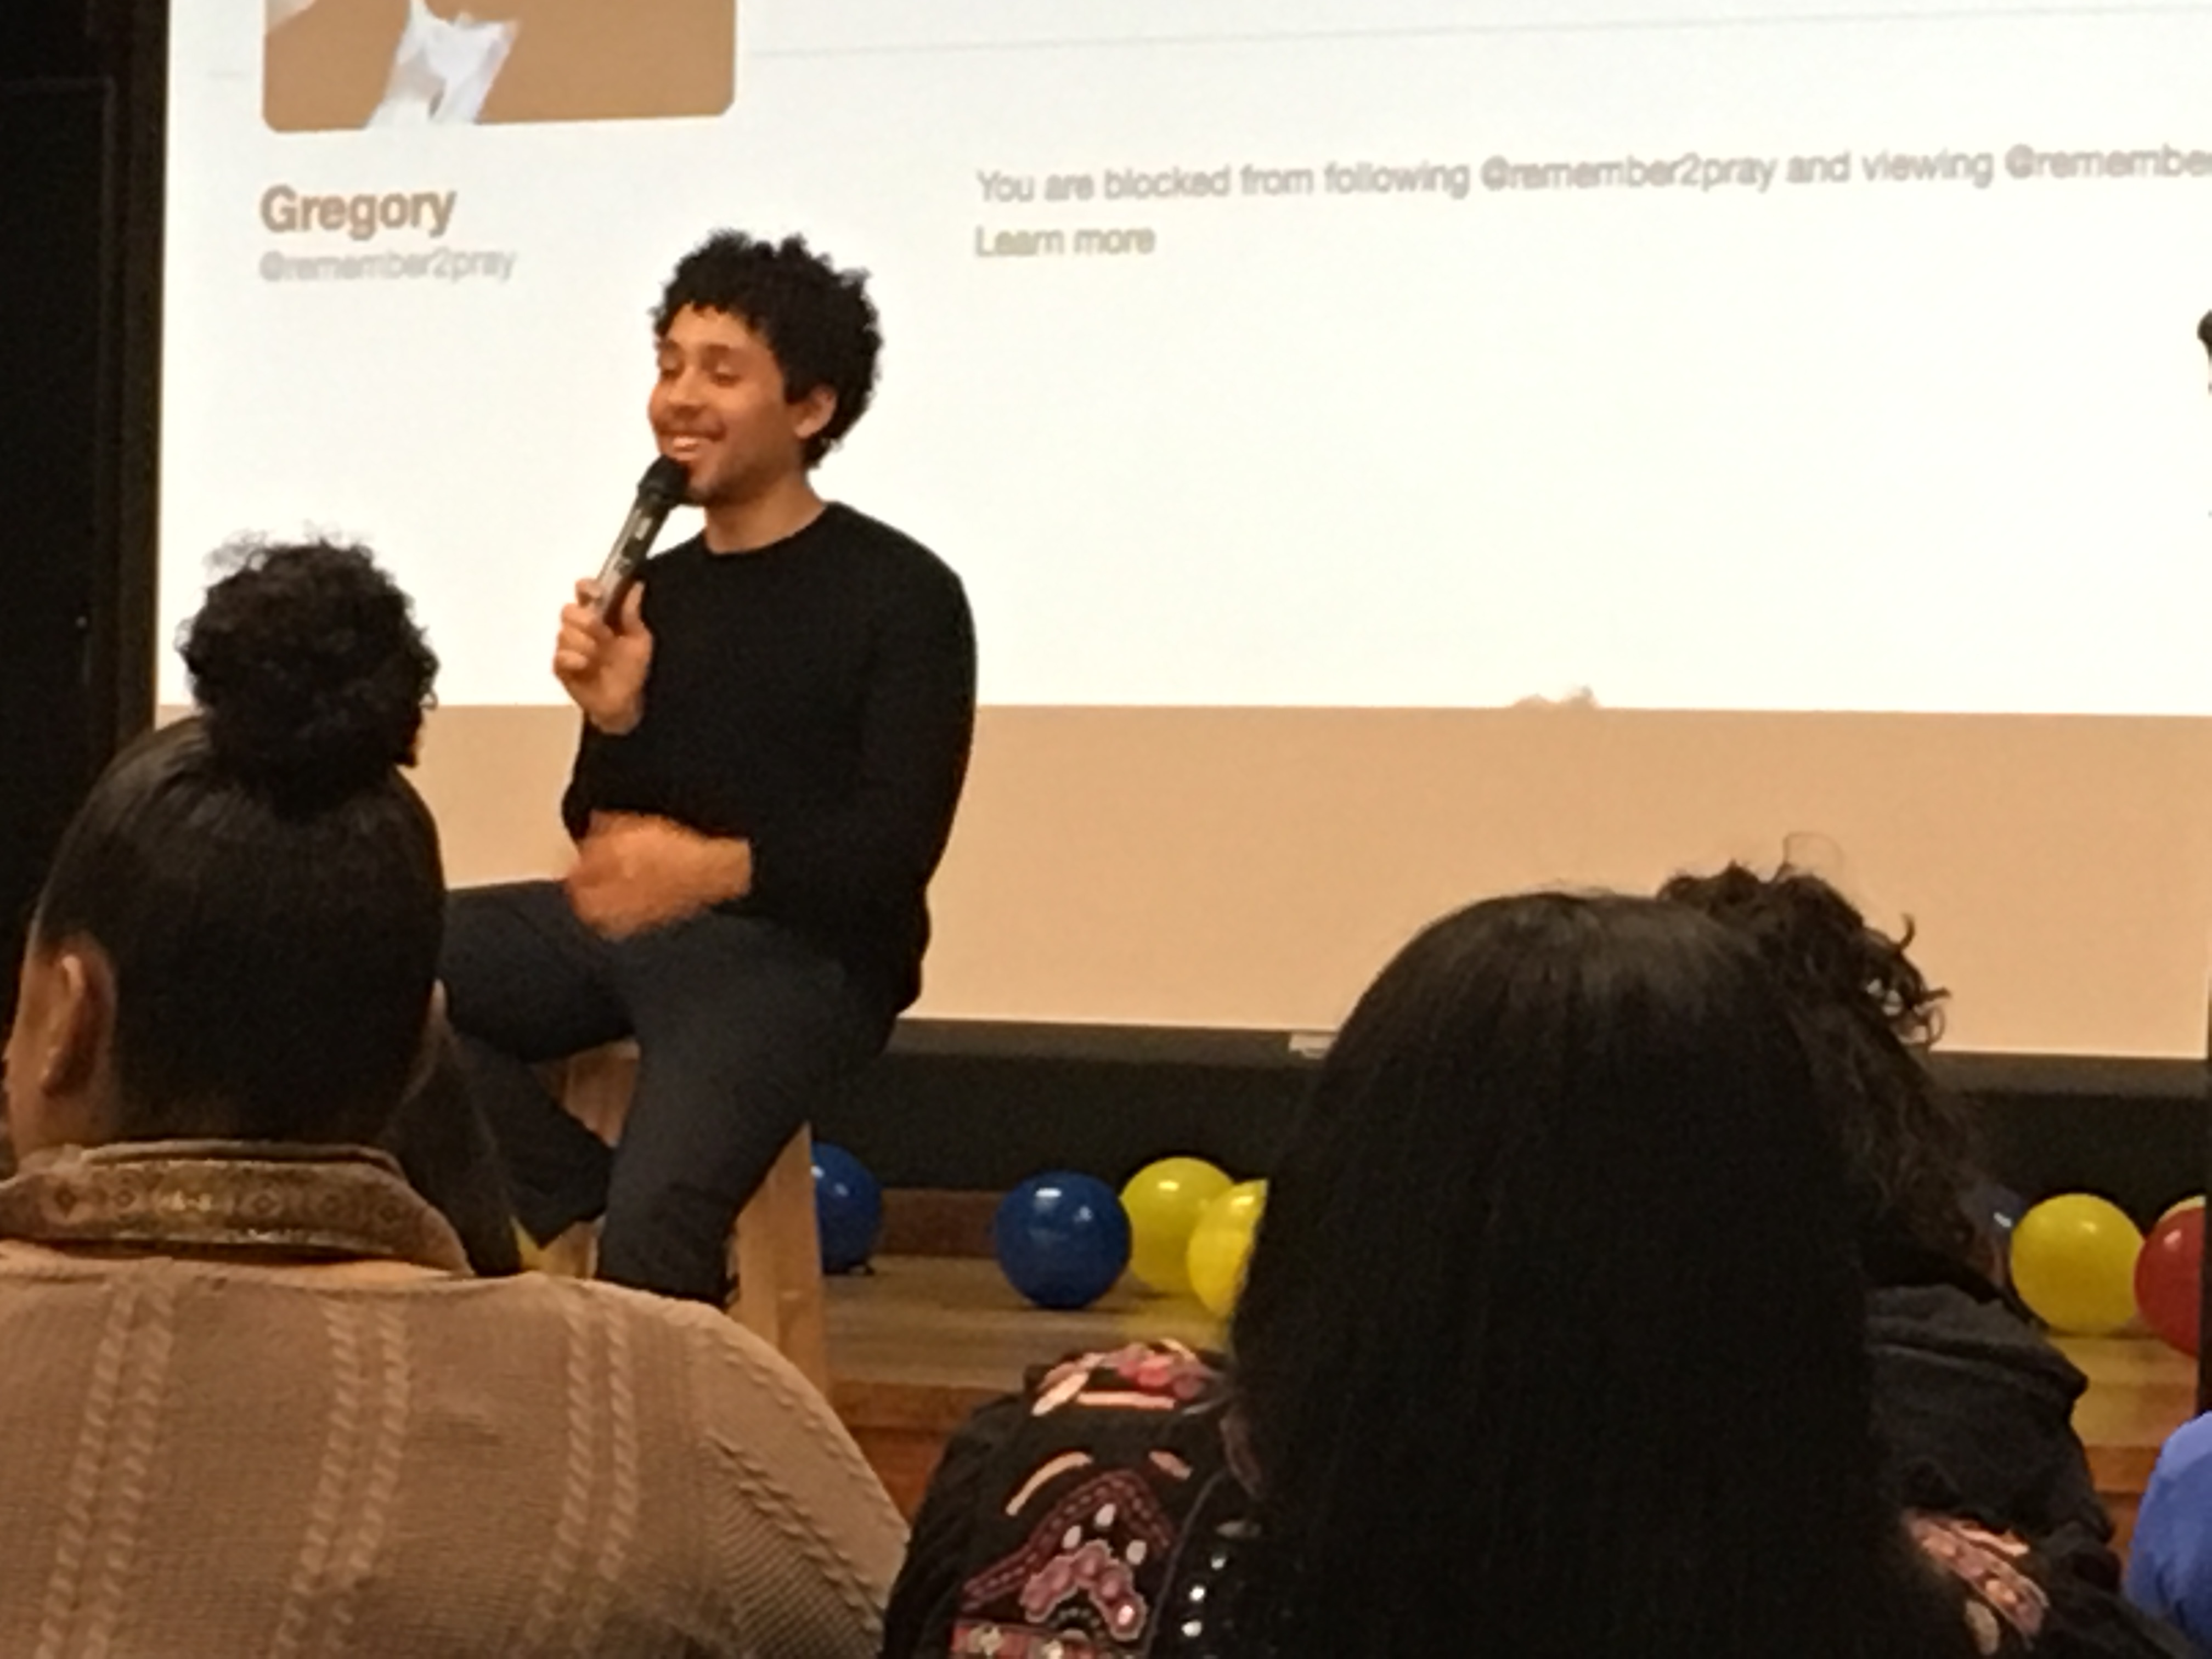 Jaboukie Young-White is perched on a stool in front of a screen, holding a microphone